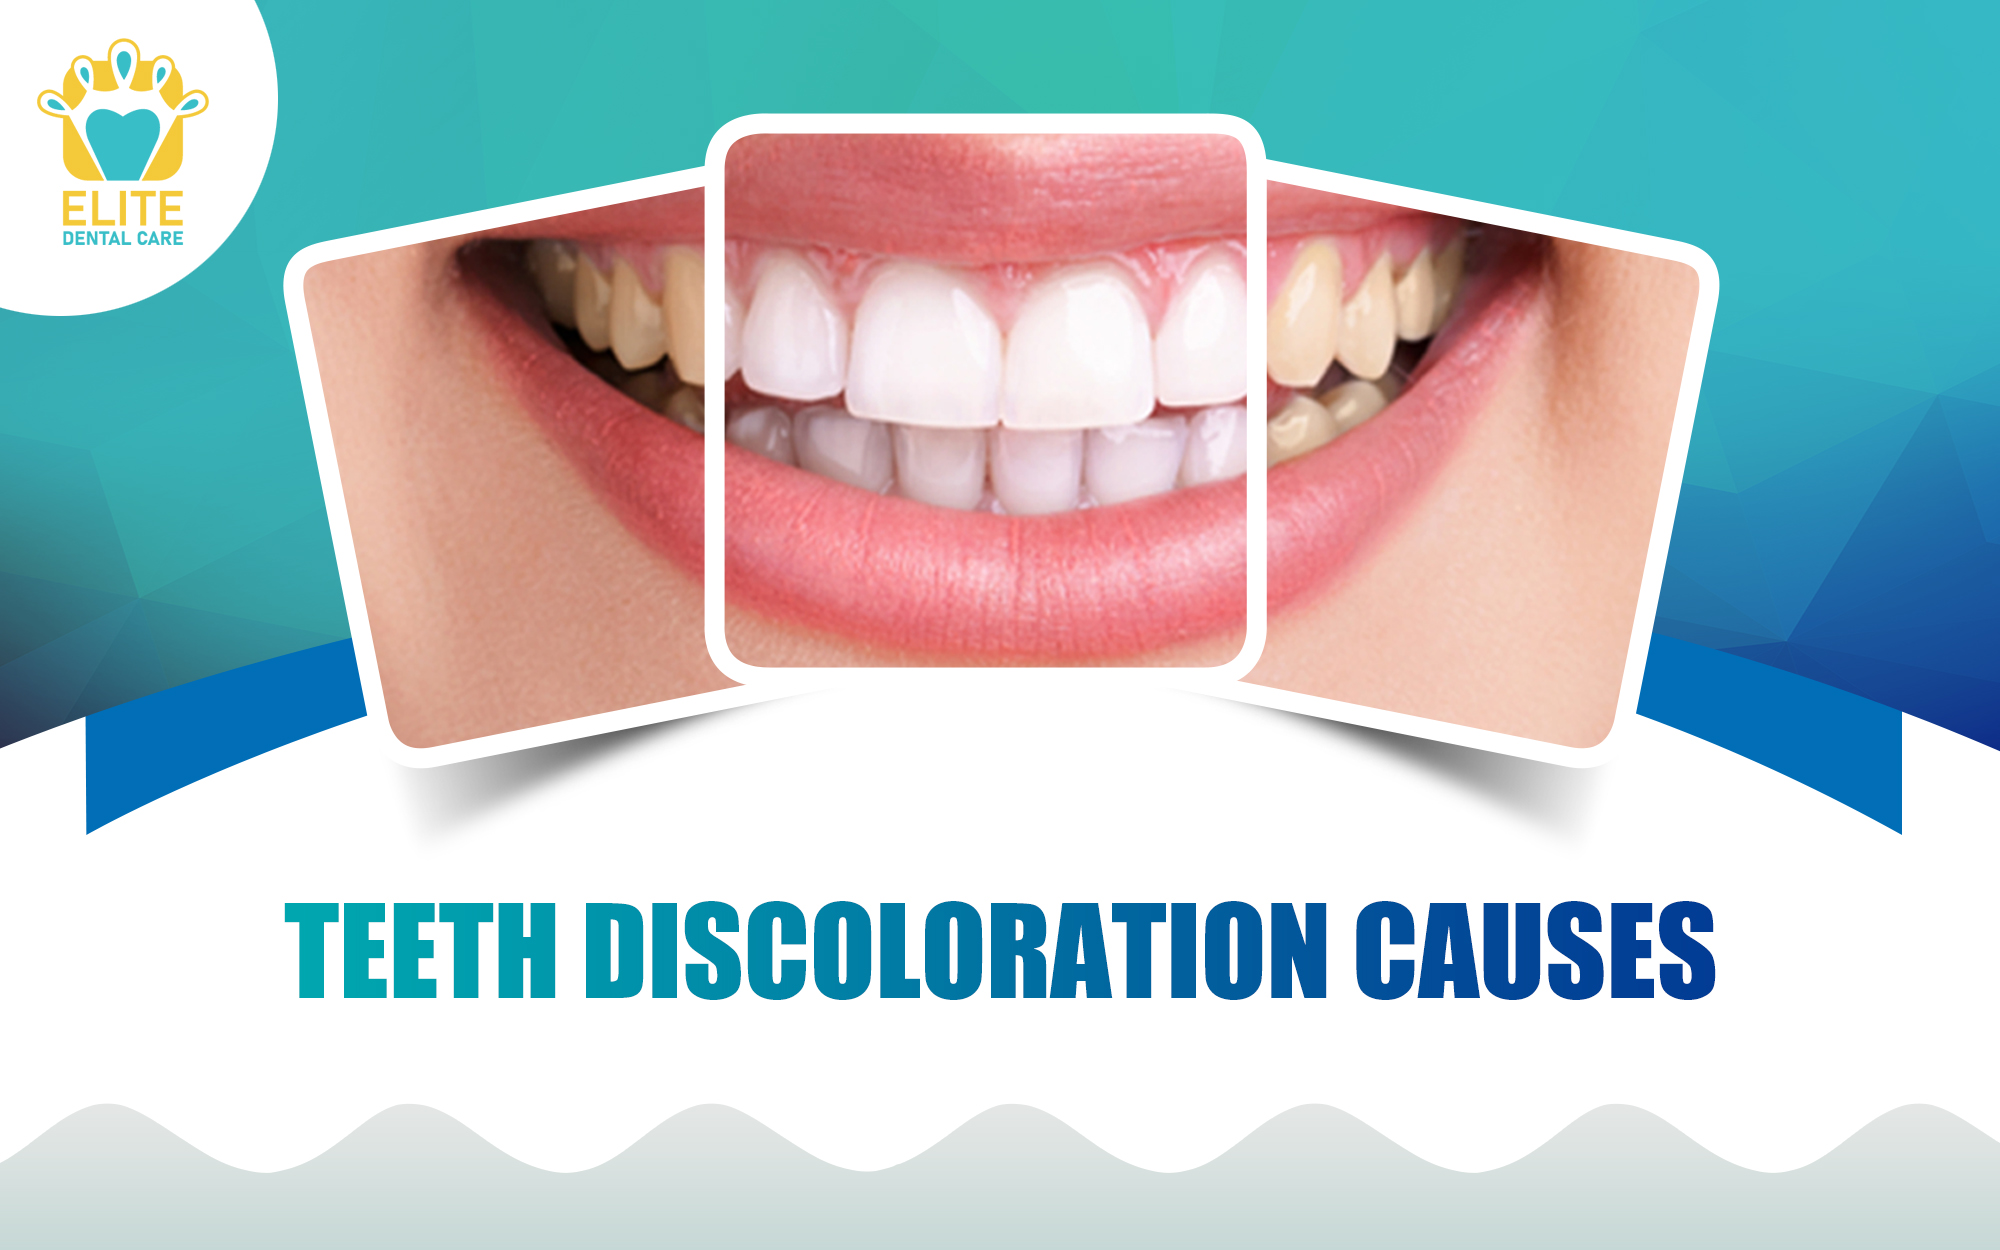 What is Treatment for Tooth Discoloration?